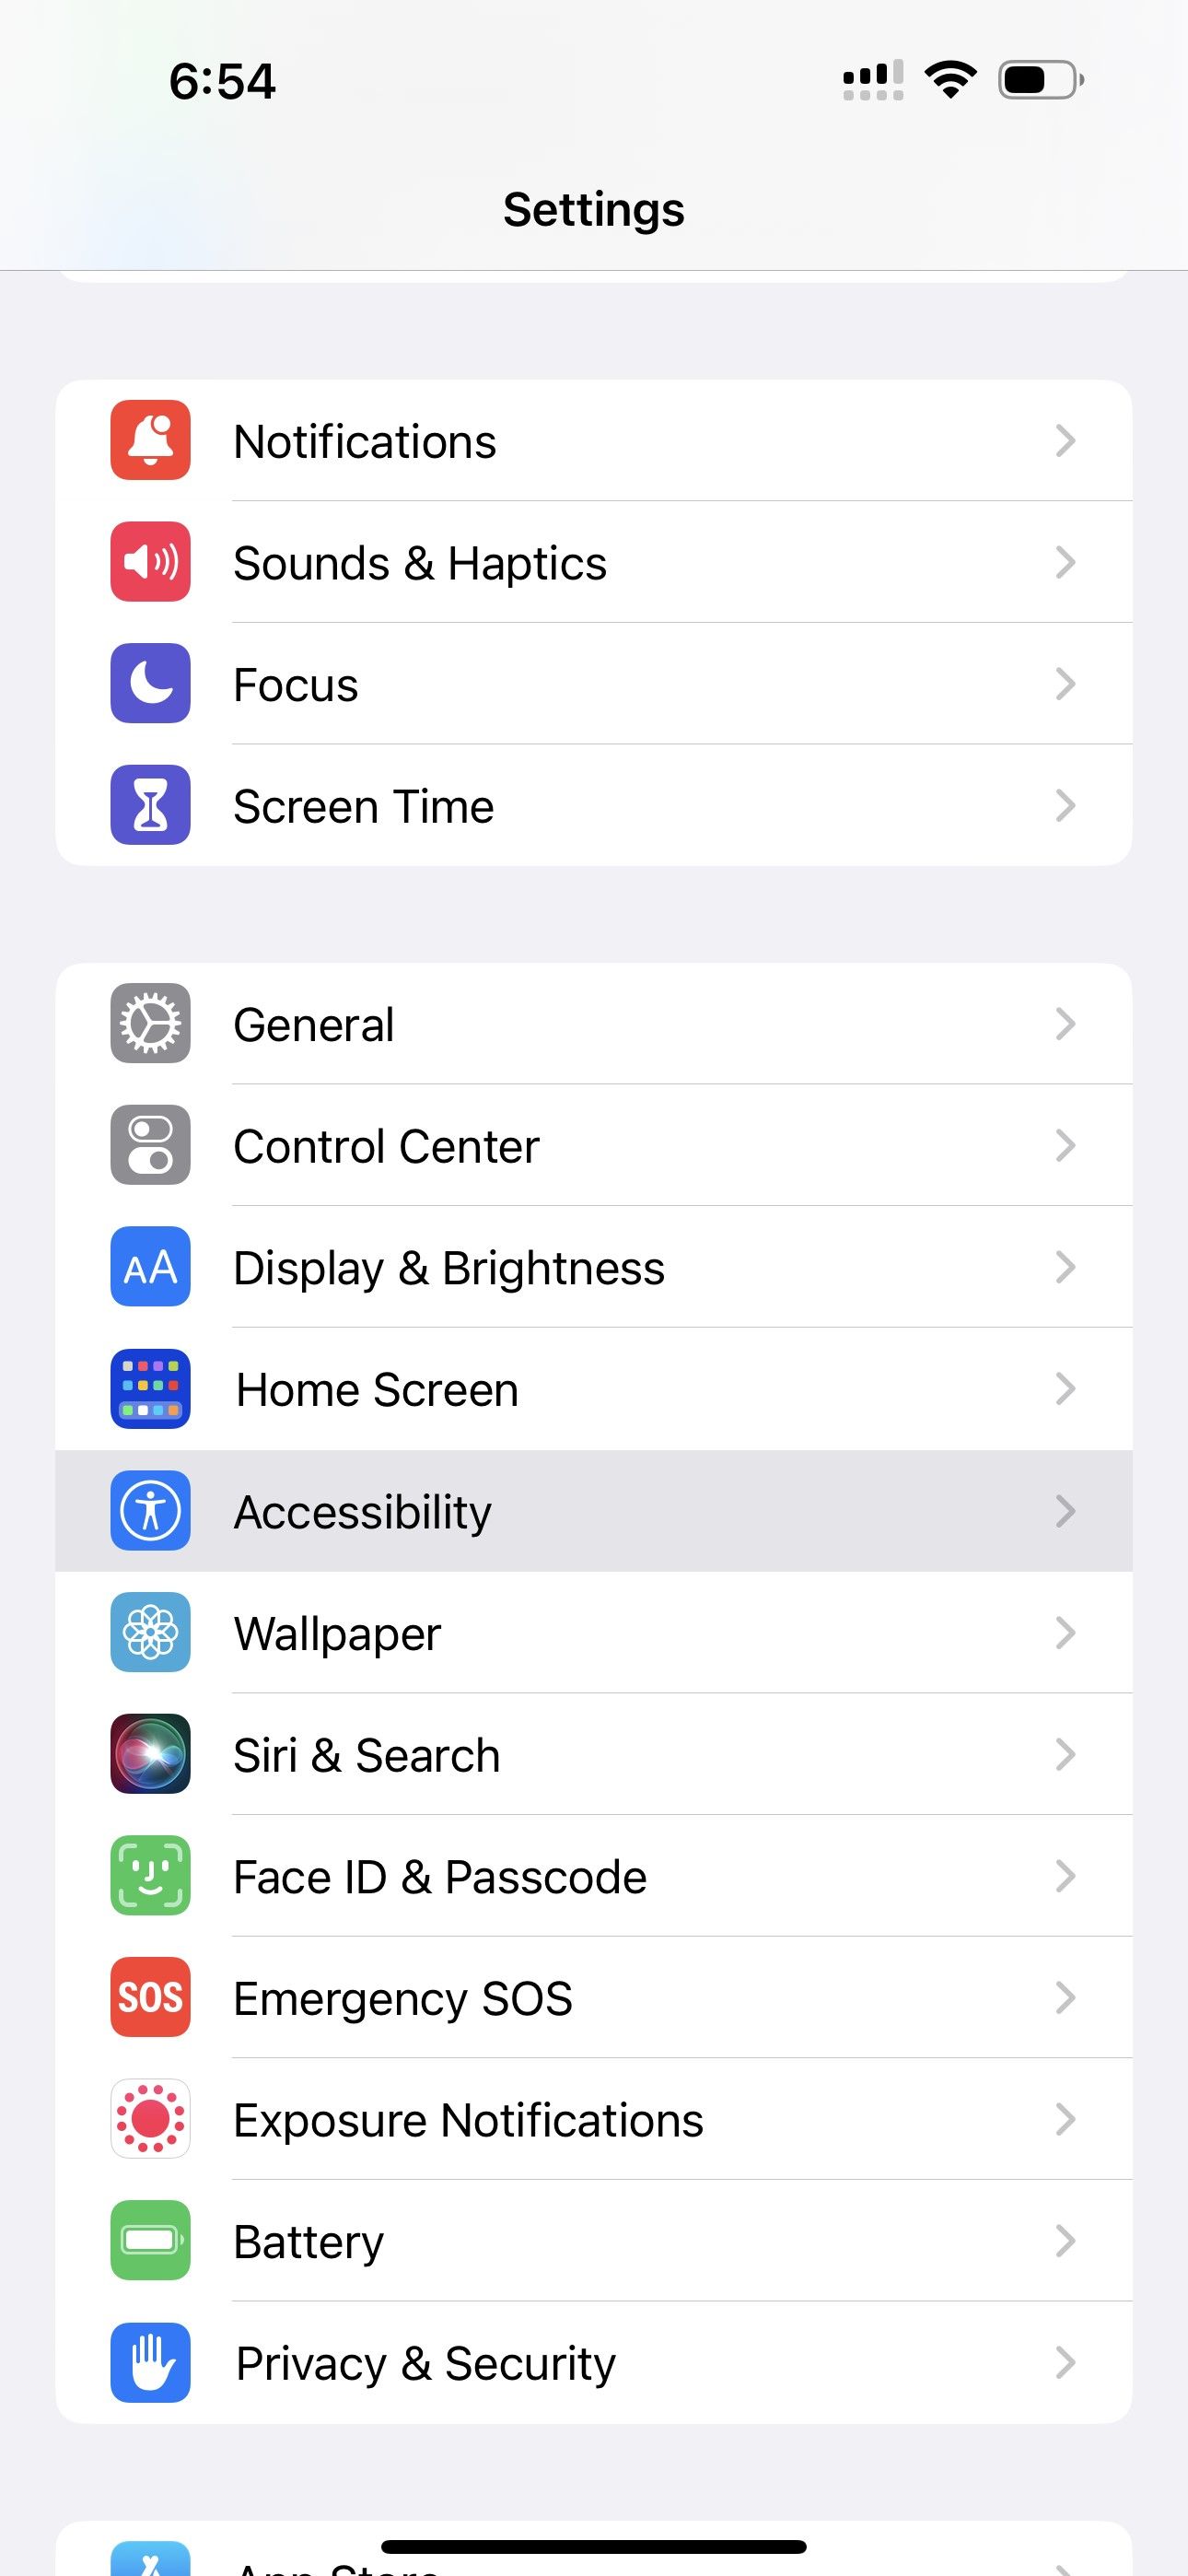 Look for Accessibility under Settings